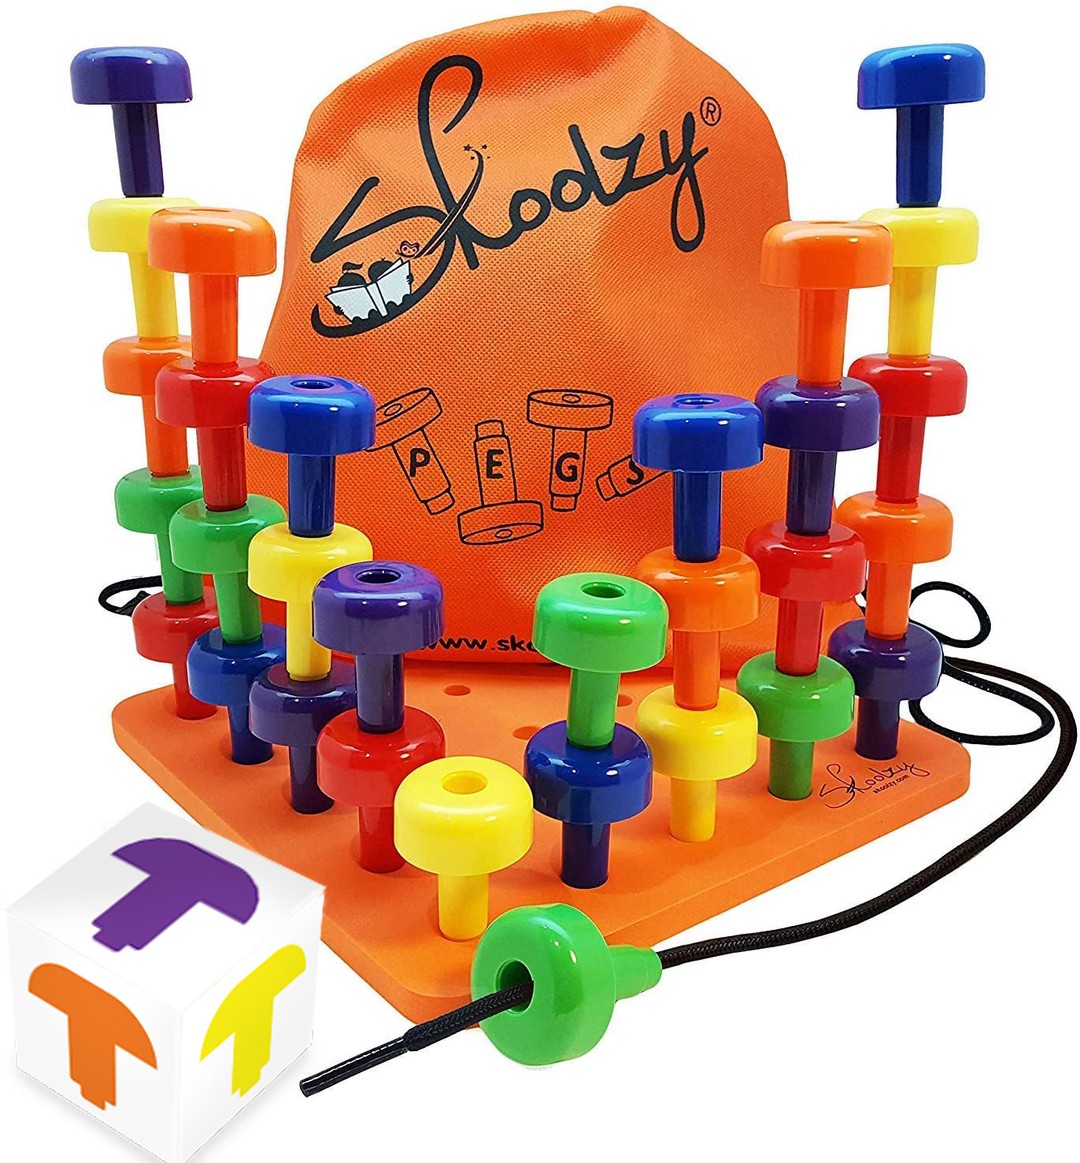 12 Ways to Use Your Pegboard Stacking Toy! – Skoolzy